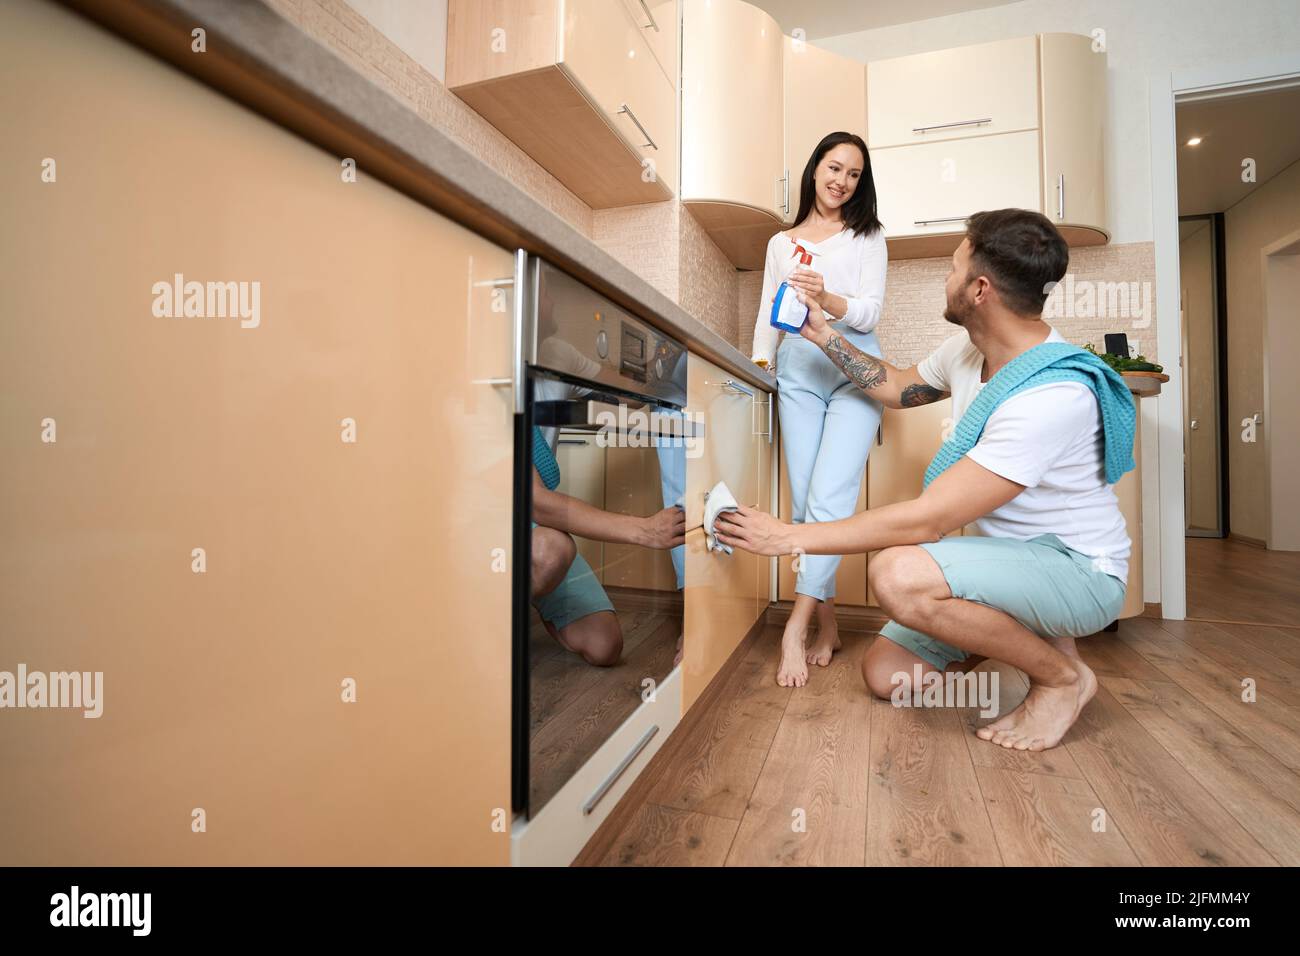 Husband passing detergent to wife while cleaning cupboard drawers Stock Photo